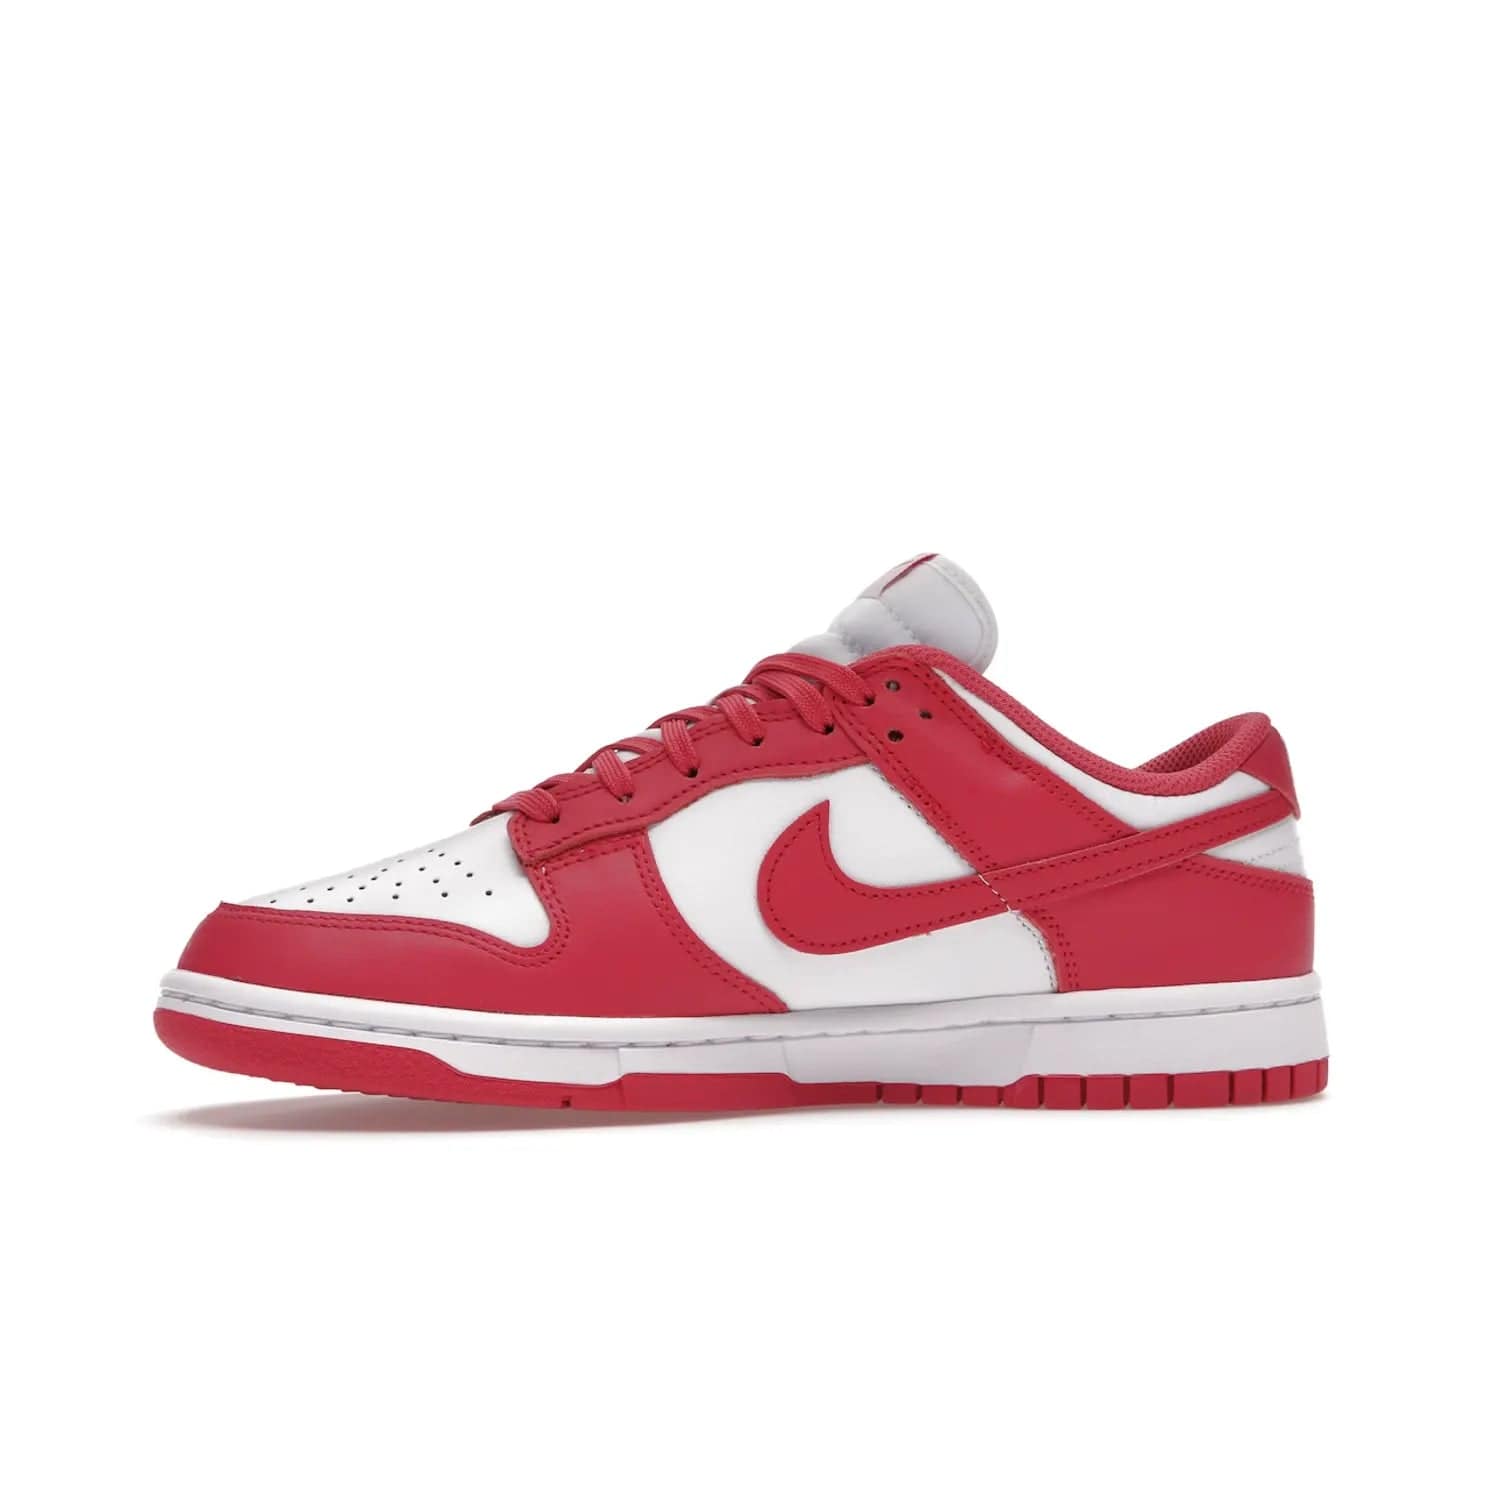 Nike Dunk Low Archeo Pink (Women's) - Image 18 - Only at www.BallersClubKickz.com - Introducing the stylish and comfortable Nike Dunk Low Archeo Pink (Women's). White/Archeo Pink colorway with white leather upper, pink overlays and Swooshes. Get yours now!